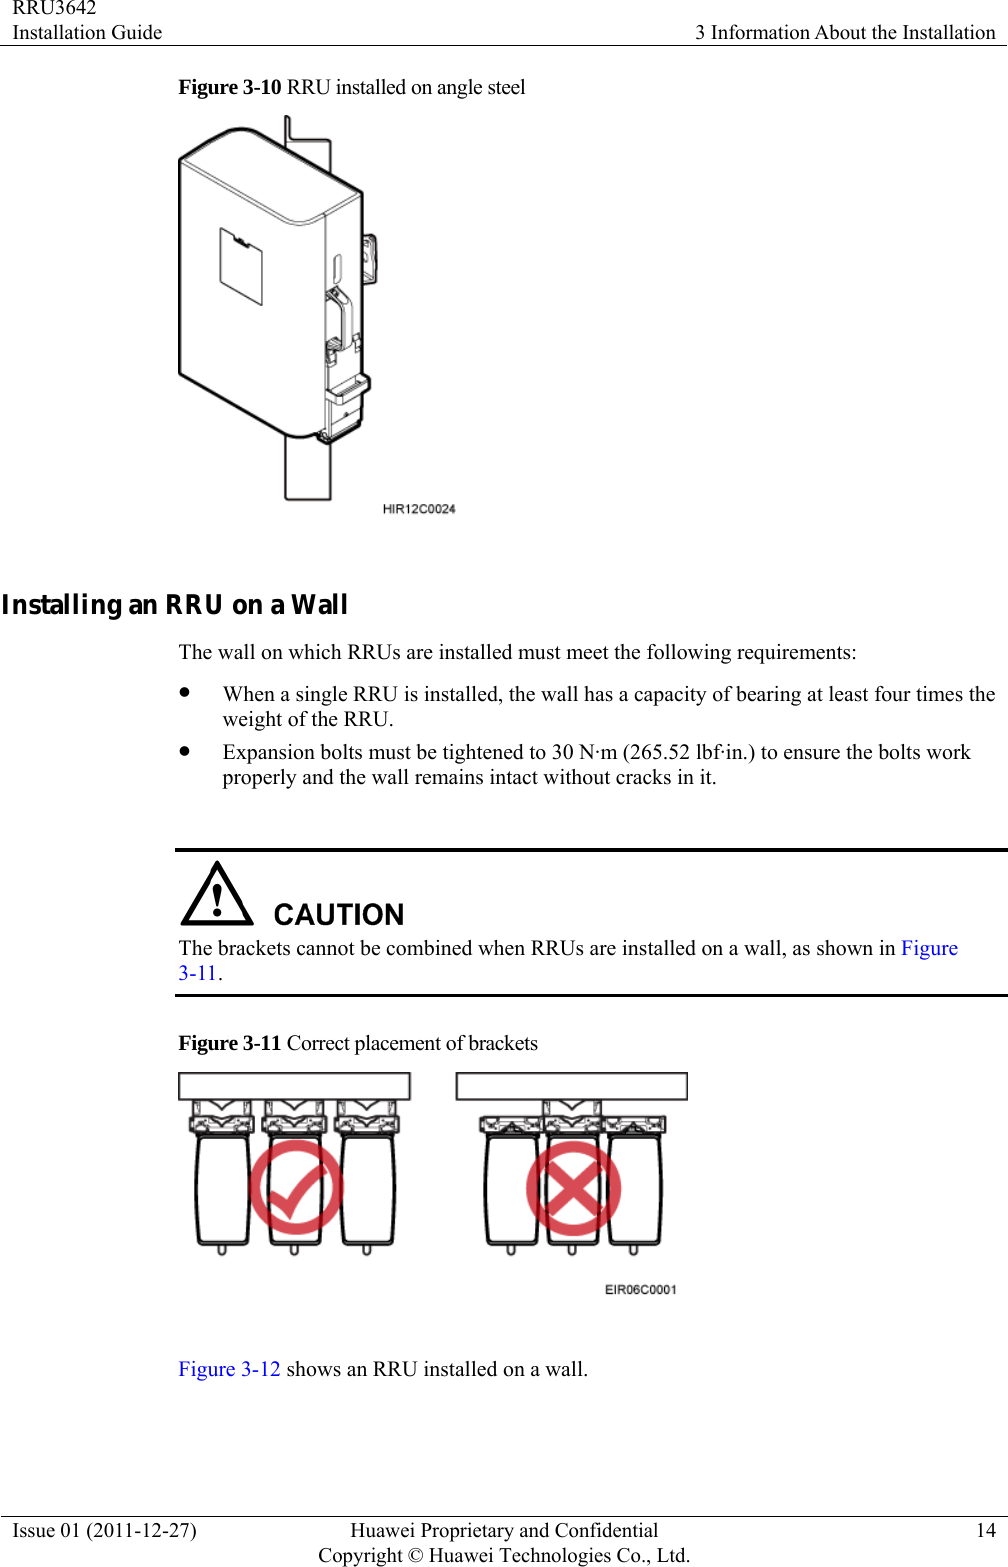 RRU3642 Installation Guide  3 Information About the Installation Issue 01 (2011-12-27)  Huawei Proprietary and Confidential         Copyright © Huawei Technologies Co., Ltd.14 Figure 3-10 RRU installed on angle steel   Installing an RRU on a Wall The wall on which RRUs are installed must meet the following requirements:   z When a single RRU is installed, the wall has a capacity of bearing at least four times the weight of the RRU. z Expansion bolts must be tightened to 30 N·m (265.52 lbf·in.) to ensure the bolts work properly and the wall remains intact without cracks in it.   The brackets cannot be combined when RRUs are installed on a wall, as shown in Figure 3-11. Figure 3-11 Correct placement of brackets     Figure 3-12 shows an RRU installed on a wall.   